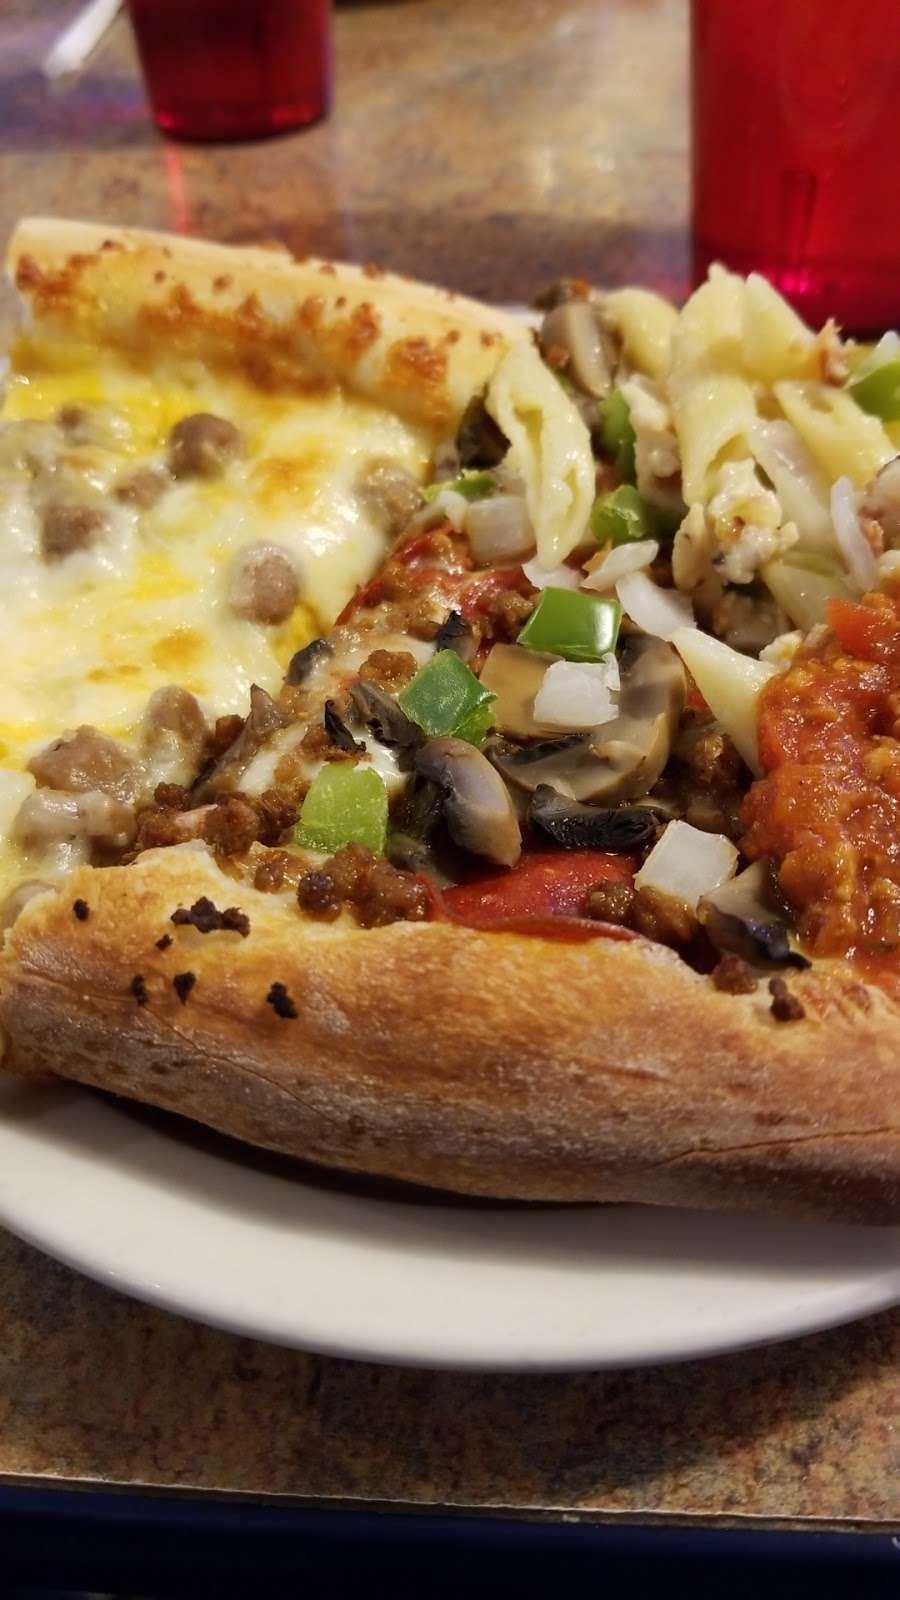 Mozzis Pizza | 2221 W Main St, Greenfield, IN 46140 | Phone: (317) 462-2999